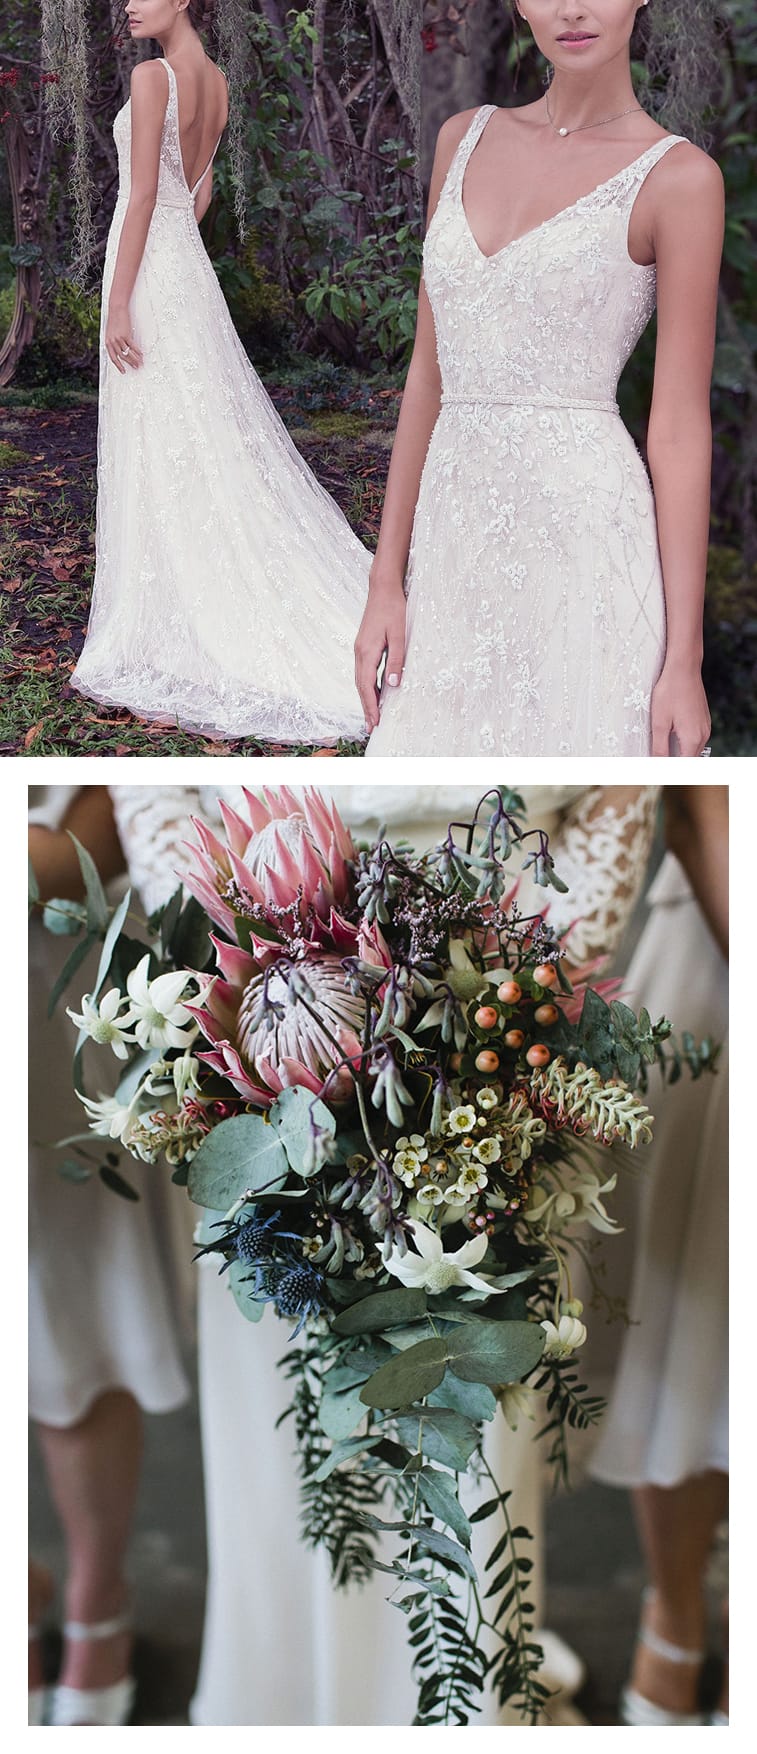 9 Boho Bouquets For Your Eclectic Wedding Gown - Lovely Jorie wedding dress by Maggie Sottero paired with a unique cascade bouquet full of succelents. Photo: It's Beautiful Here | Bouquet: Loose Leaf 